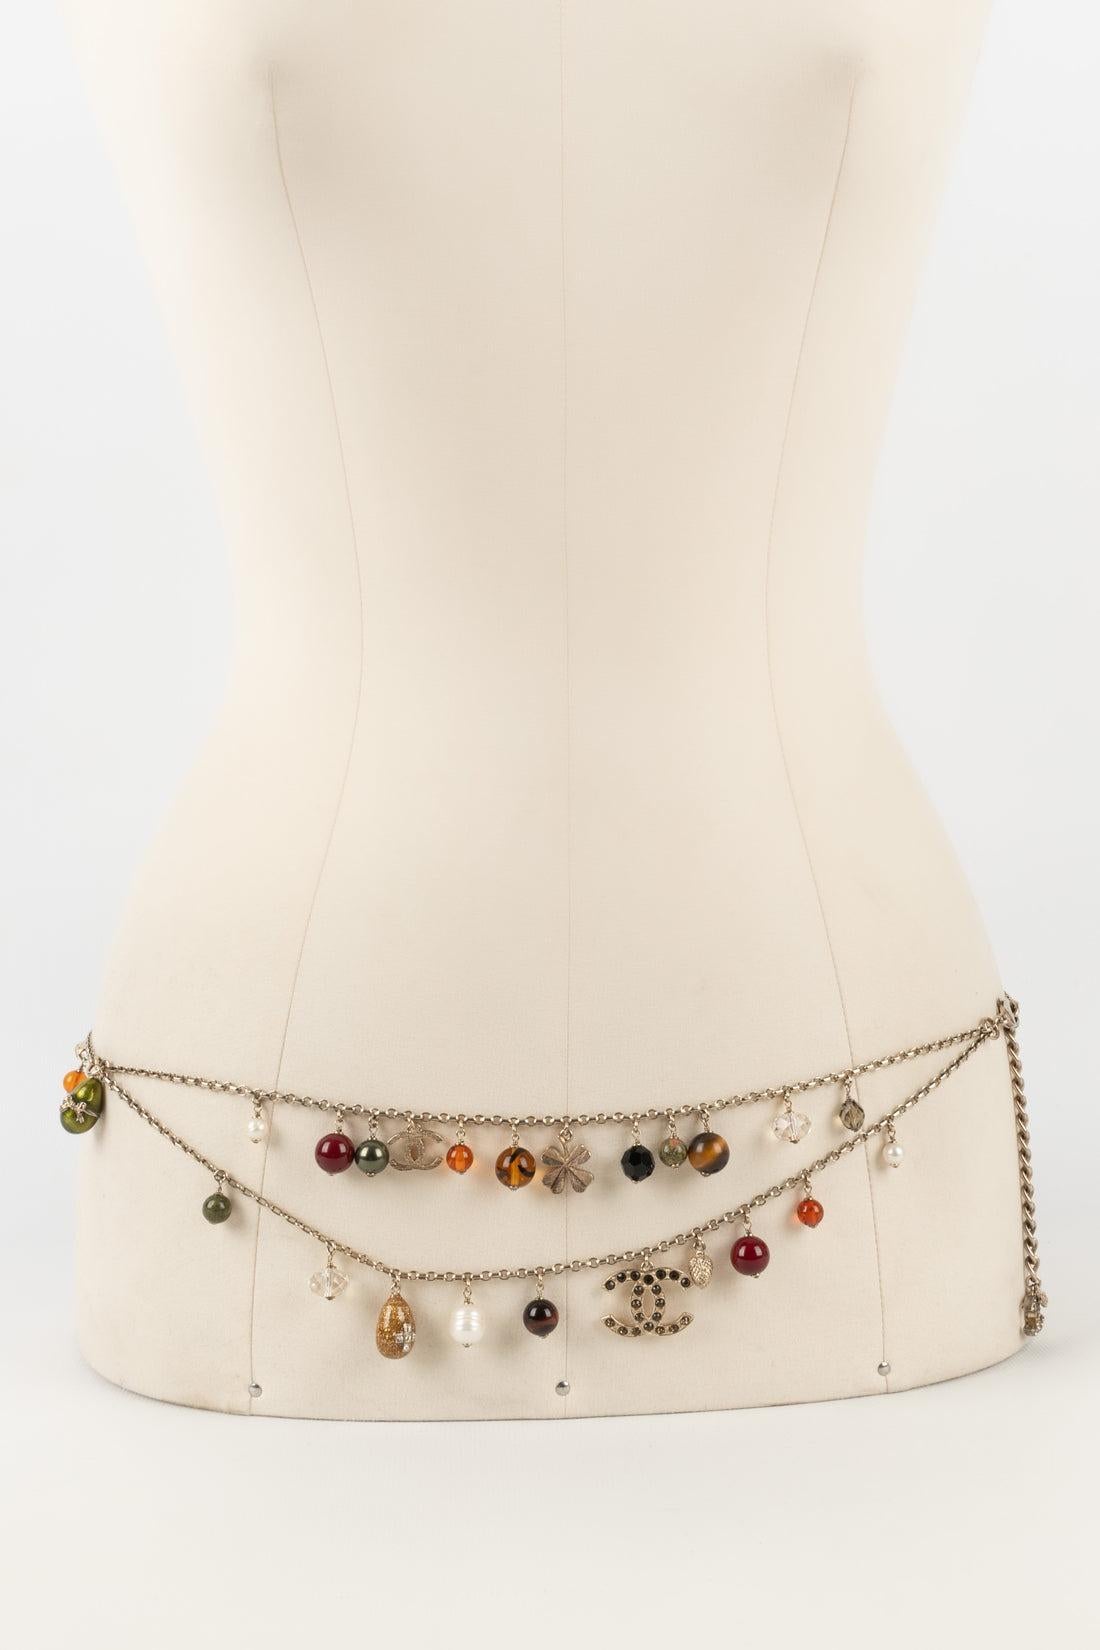 Chanel - (Made in France) Silvery metal belt ornamented with charms and pearls. Fall-Winter 2007 Collection.

Additional information:
Condition: Very good condition
Dimensions: Length: from 95 cm to 104 cm
Period: 21st Century

Seller Reference: